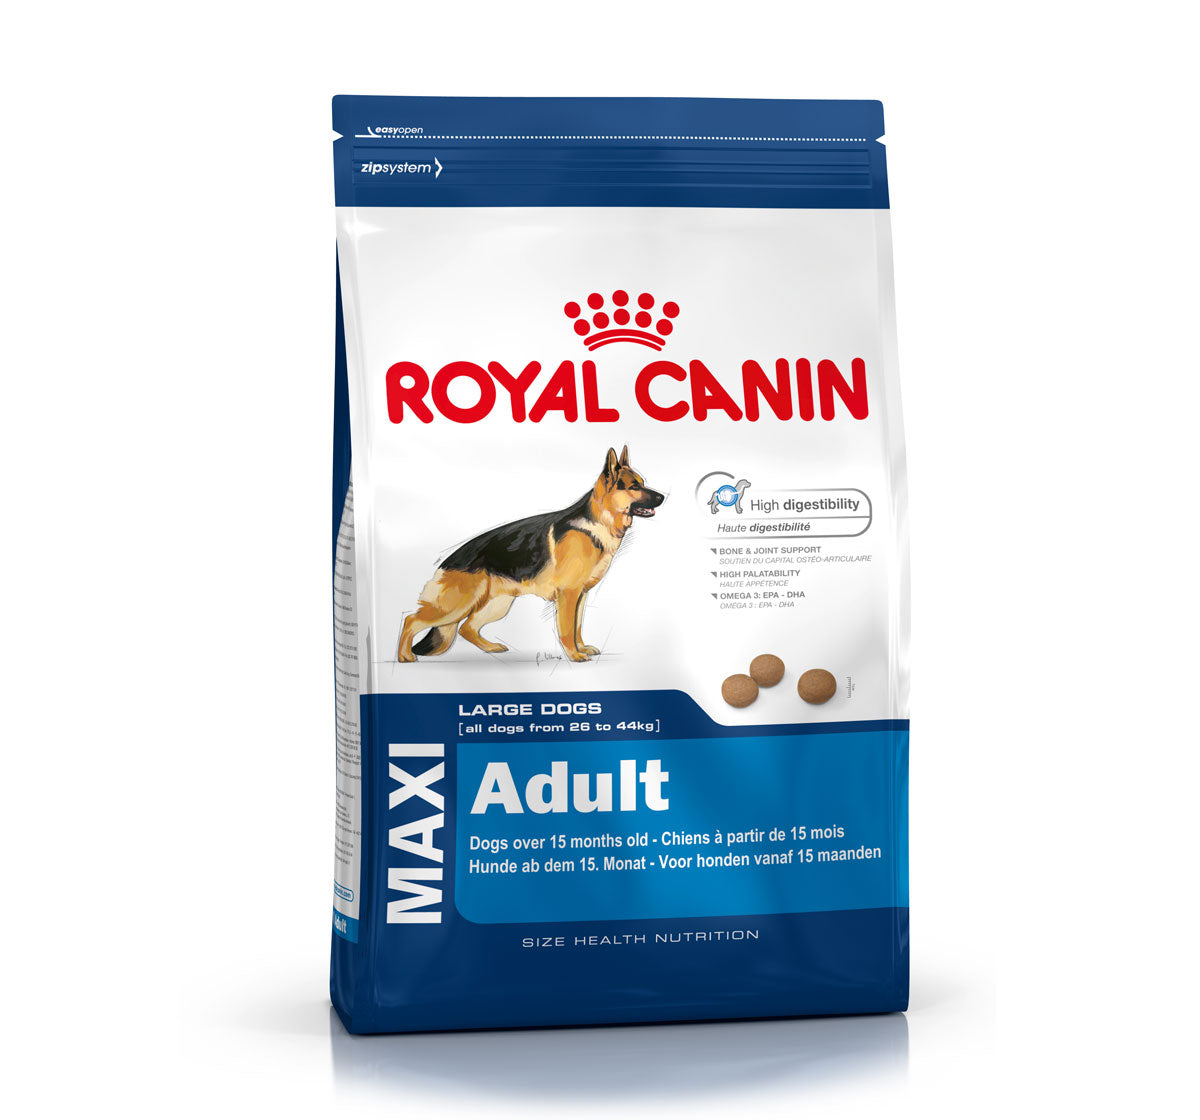 Royal Canin Adult | Free* NJ Local | TheHungryPuppy.com